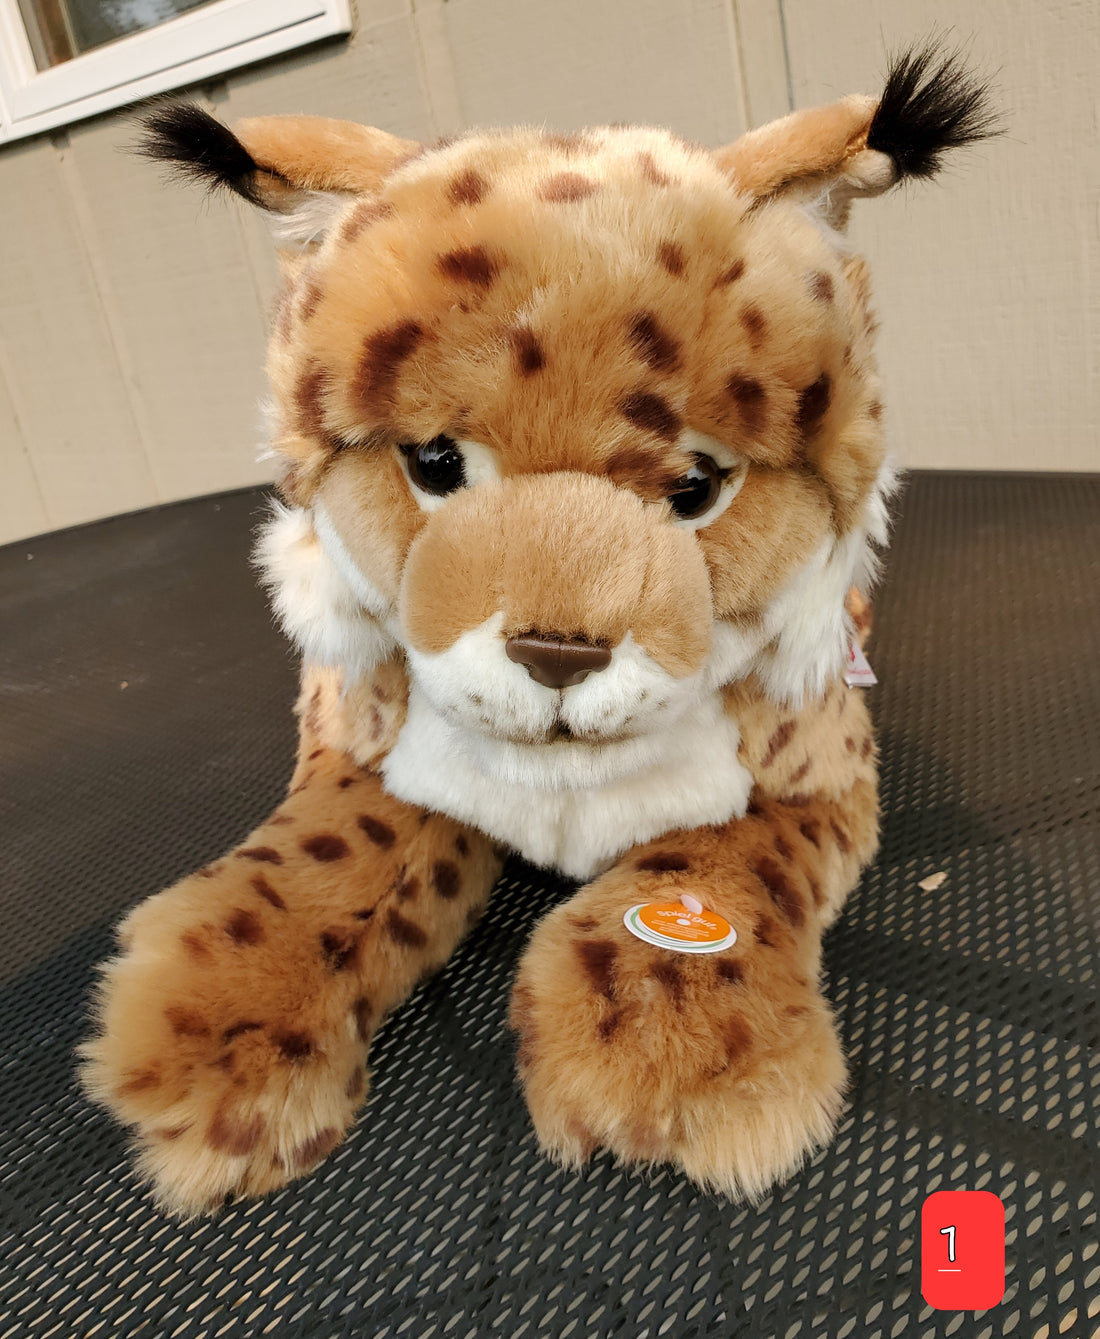 Lynx - 17.5" Non-Jointed Plush by Teddy Hermann